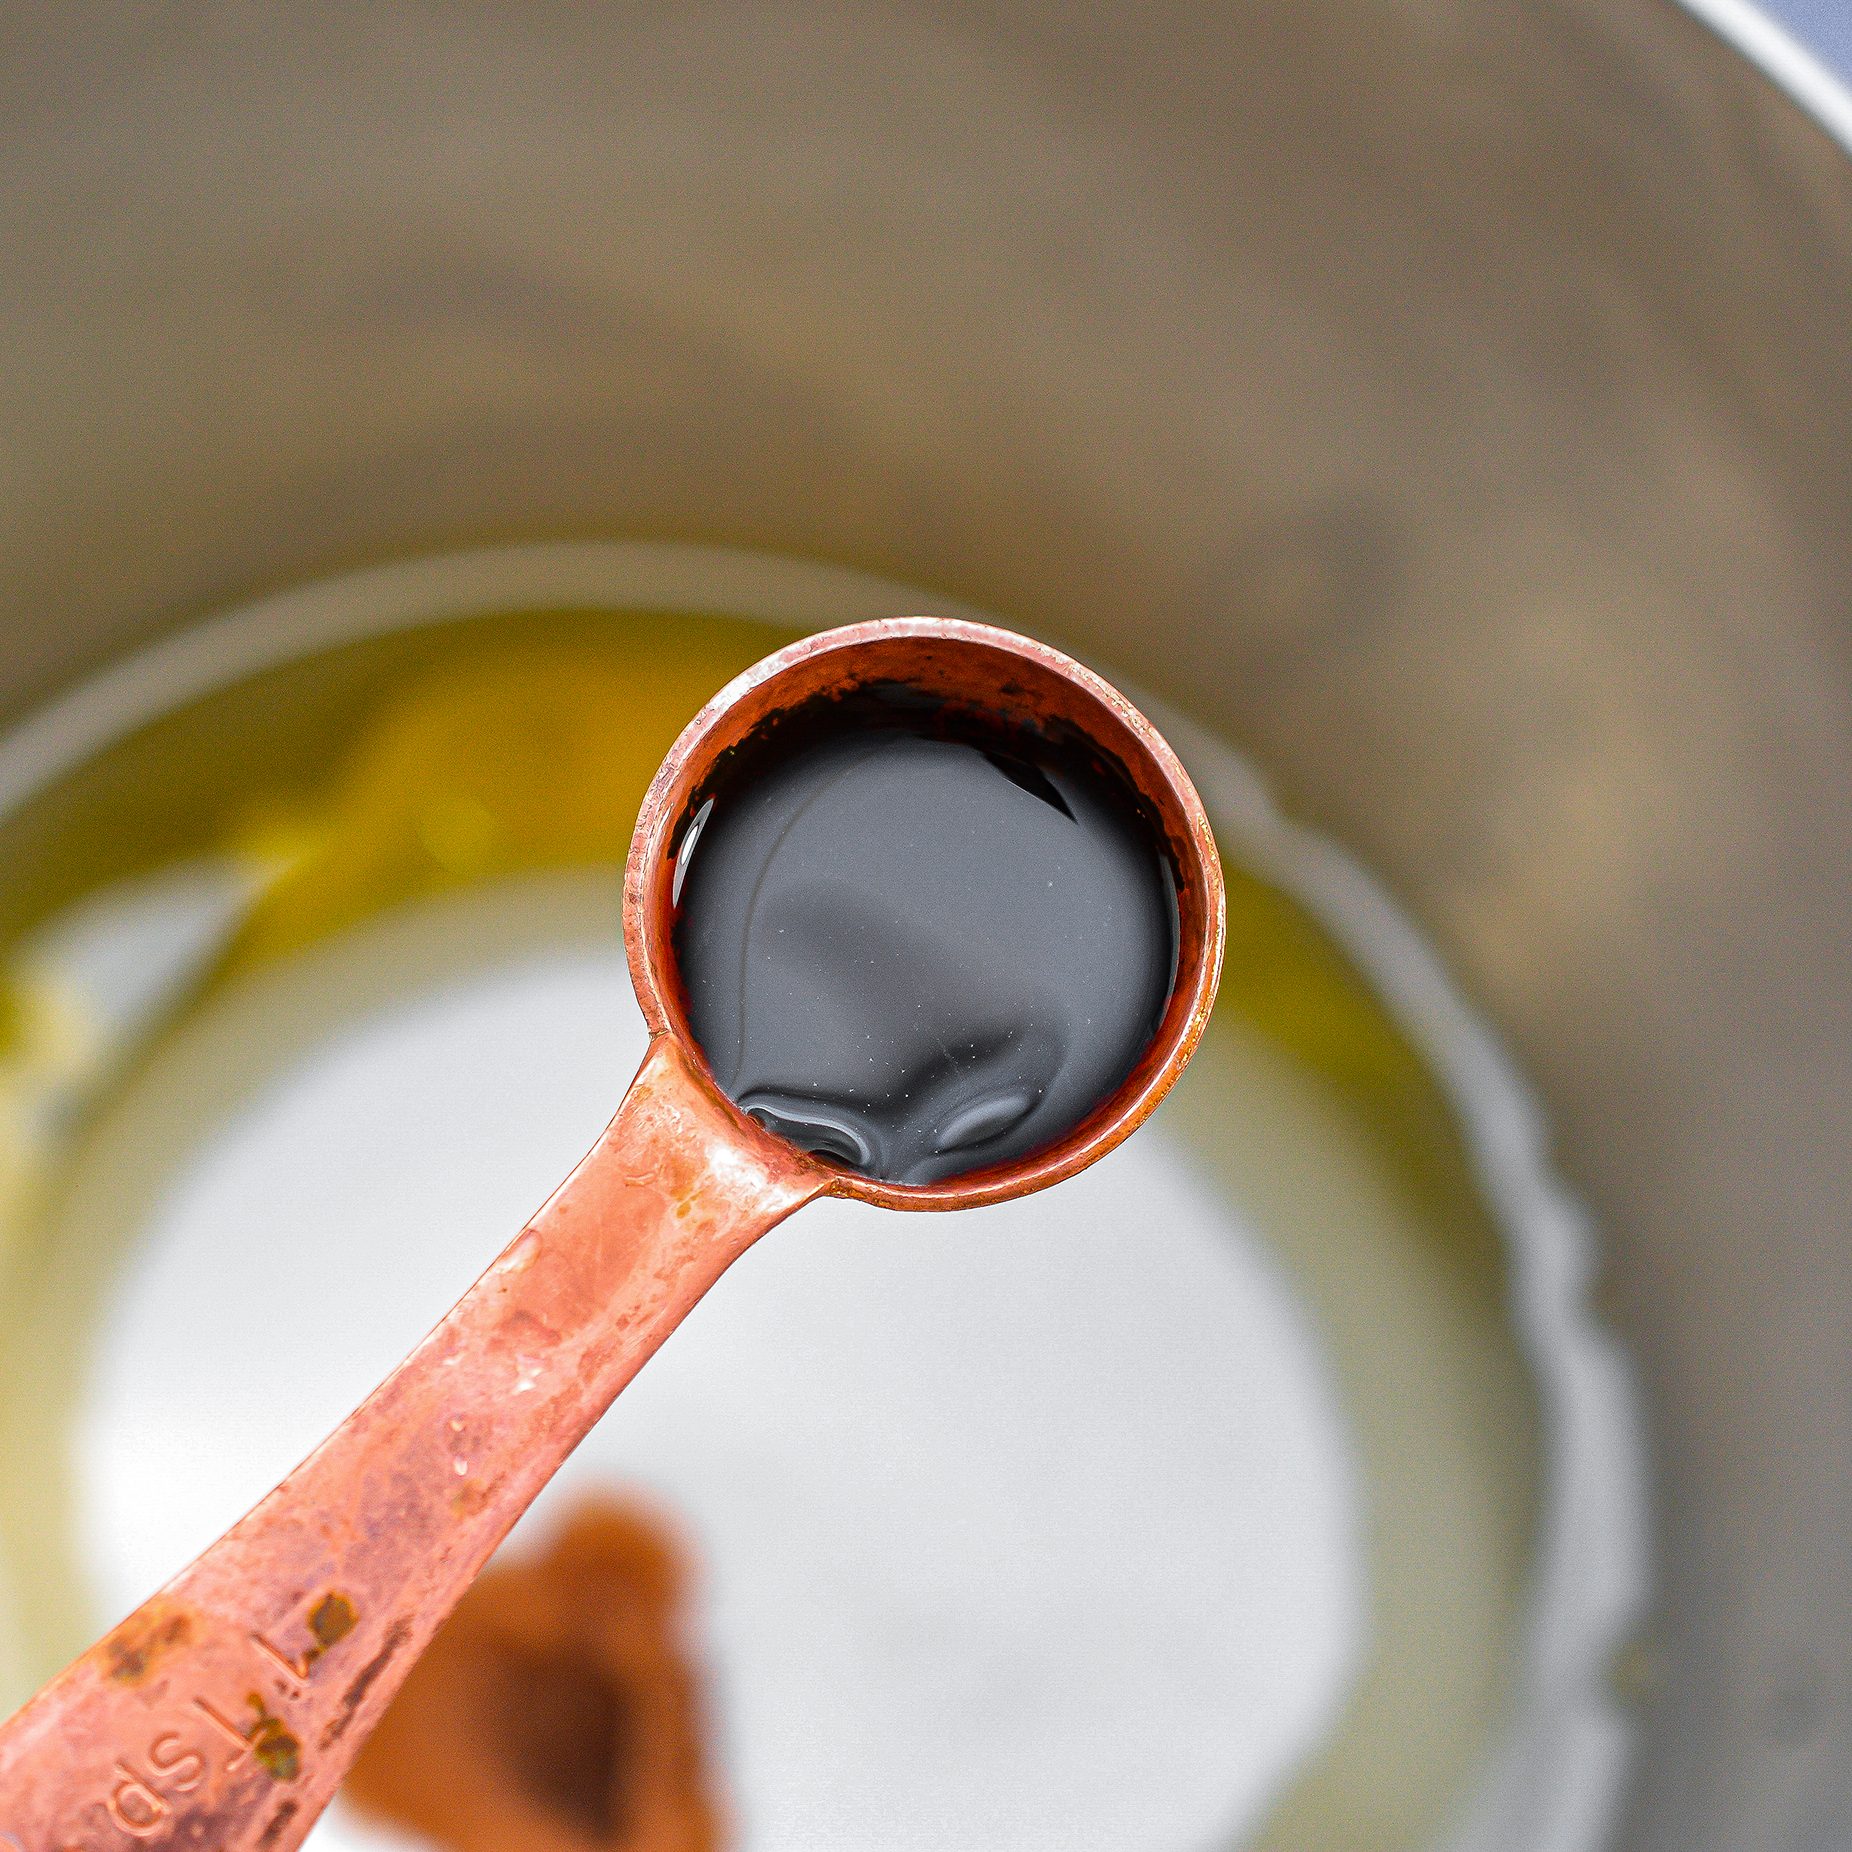 Mix together the oil, eggs, and sugar for the cake until well blended, then stir in the vanilla extract.